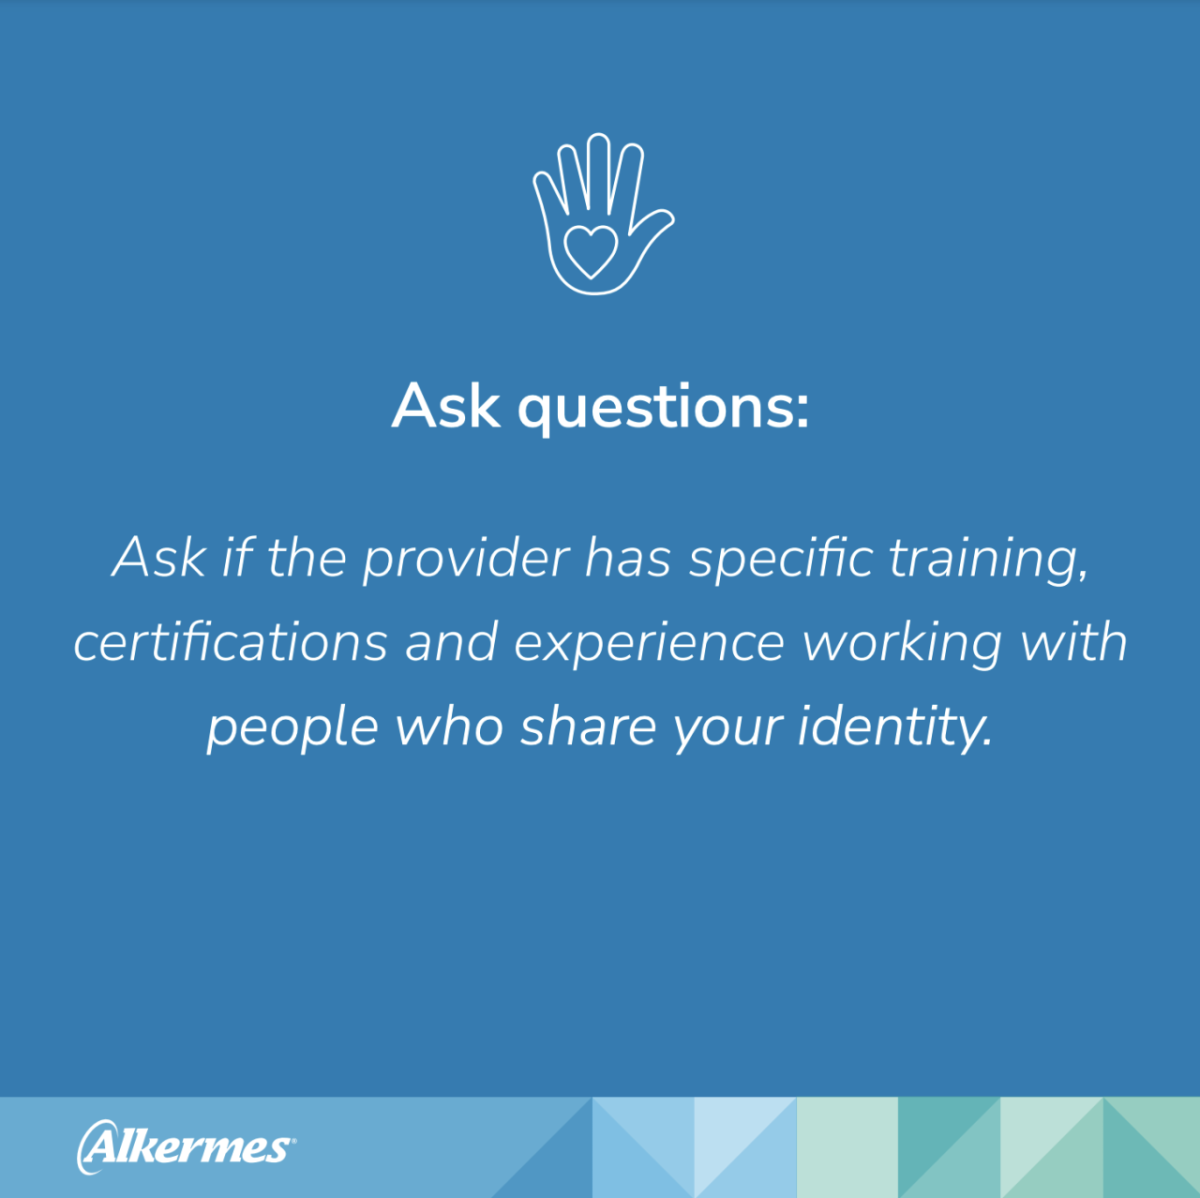 PDF Slide with the text "Ask questions: Ask if the provider has specific training, certifications and experience working with people who share your identity"